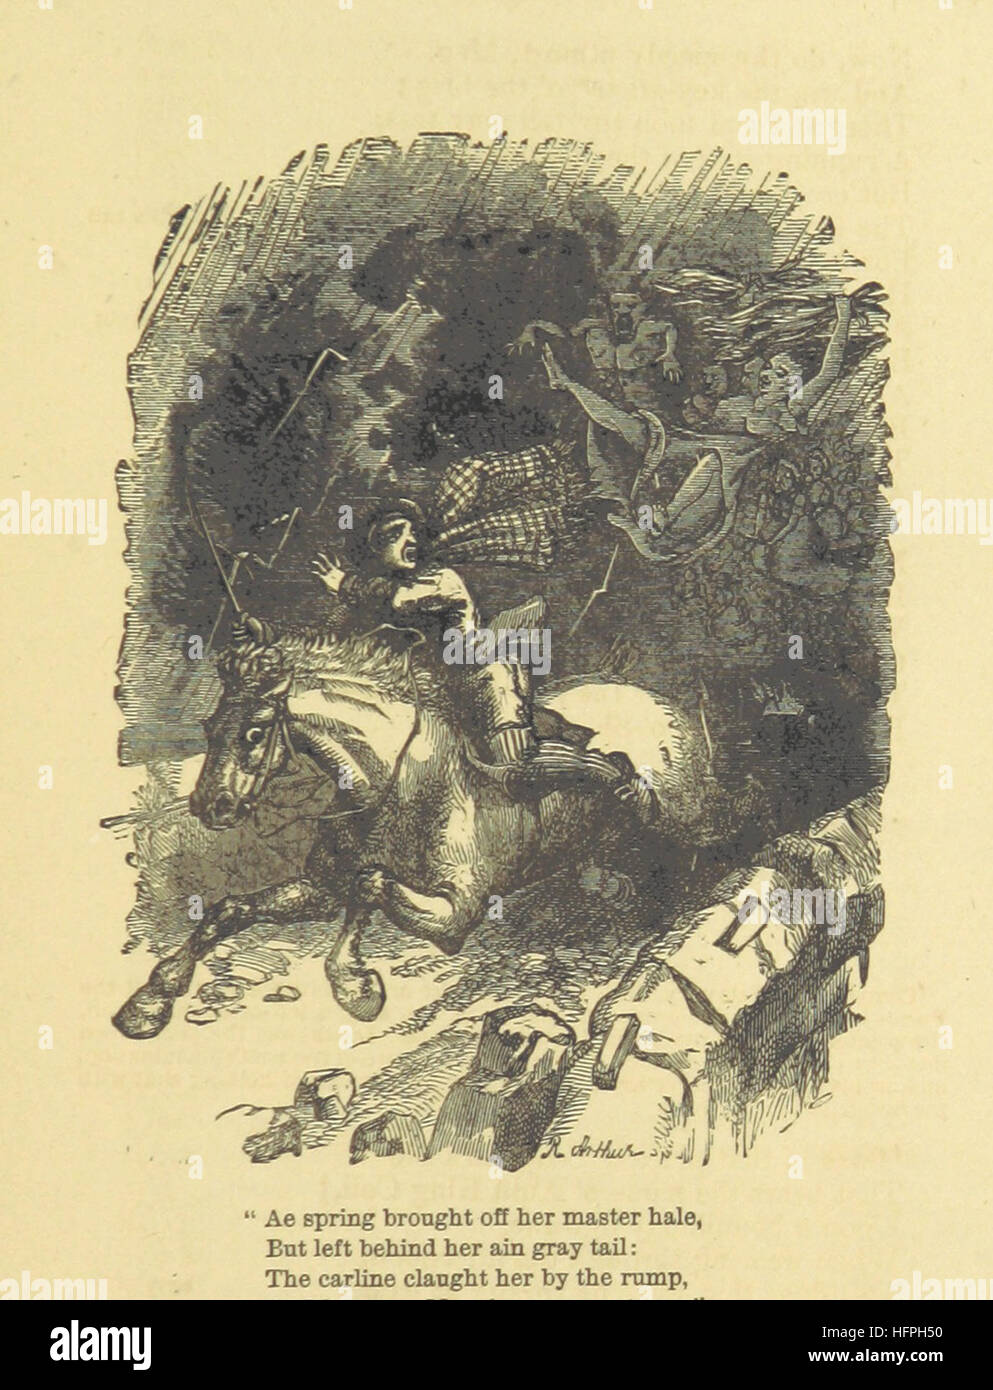 Image taken from page 87 of 'The Poetical Works of Robert Burns; with memoir, prefatory notes, and a complete marginal glossary. Edited by John & Angus Macpherson. With portrait and illustrations' Image taken from page 87 of 'The Poetical Works of Stock Photo